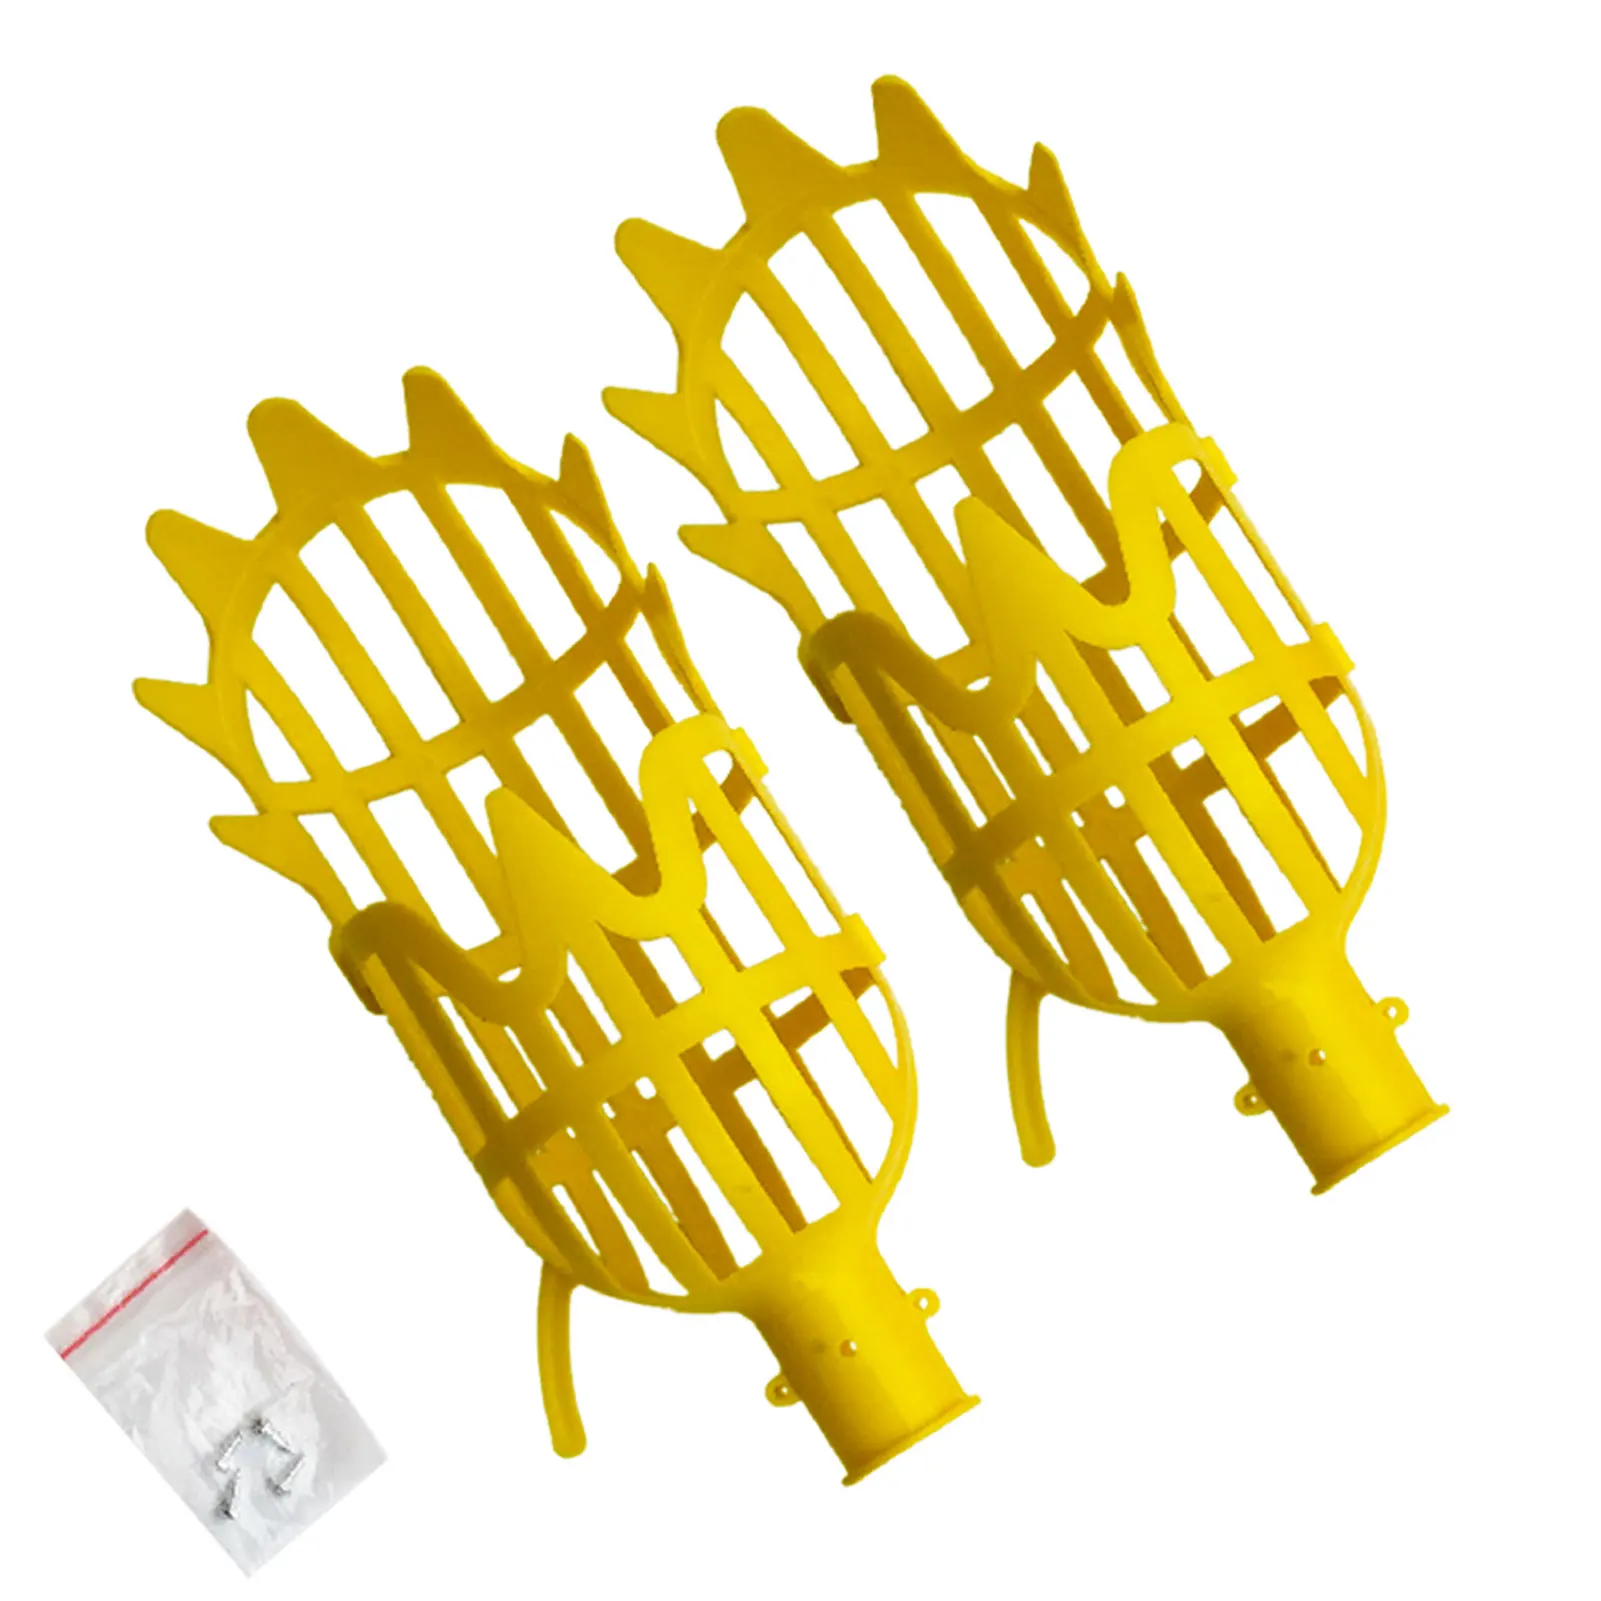 

2pcs/pack Manual Waxberry Head Orchard Twisted Loquat Oranges Avocado Accessories Collecting Fruit Picker Basket Pick Up Tool